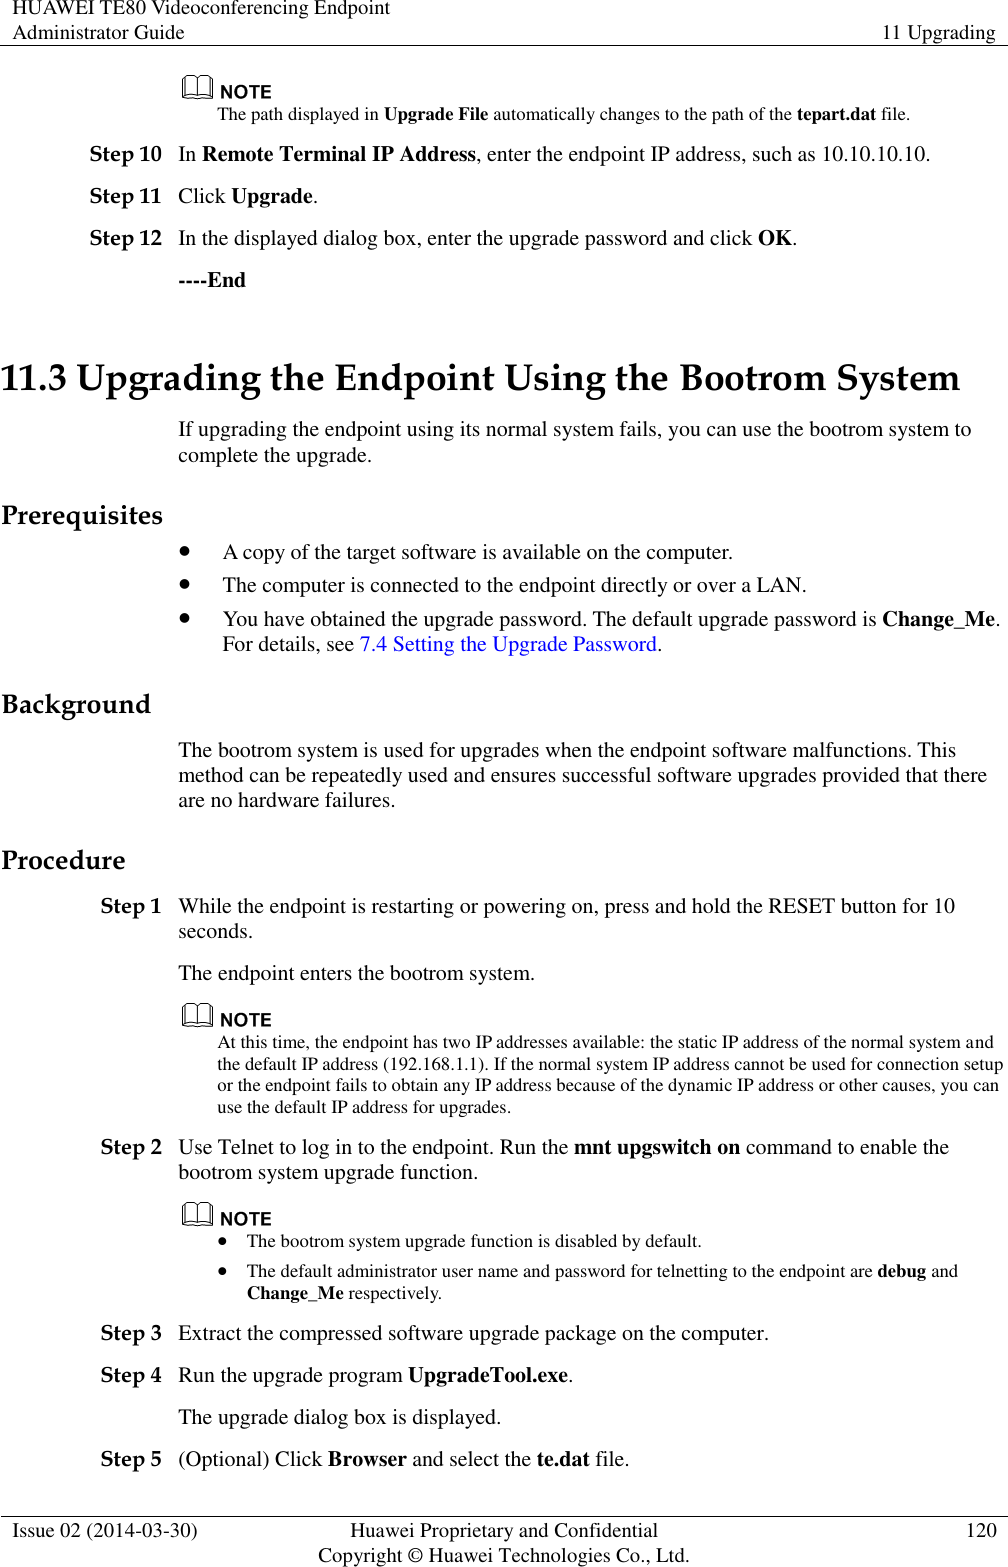 HUAWEI TE80 Videoconferencing Endpoint Administrator Guide 11 Upgrading  Issue 02 (2014-03-30) Huawei Proprietary and Confidential Copyright © Huawei Technologies Co., Ltd. 120   The path displayed in Upgrade File automatically changes to the path of the tepart.dat file. Step 10 In Remote Terminal IP Address, enter the endpoint IP address, such as 10.10.10.10. Step 11 Click Upgrade. Step 12 In the displayed dialog box, enter the upgrade password and click OK. ----End 11.3 Upgrading the Endpoint Using the Bootrom System If upgrading the endpoint using its normal system fails, you can use the bootrom system to complete the upgrade.   Prerequisites  A copy of the target software is available on the computer.  The computer is connected to the endpoint directly or over a LAN.  You have obtained the upgrade password. The default upgrade password is Change_Me. For details, see 7.4 Setting the Upgrade Password. Background The bootrom system is used for upgrades when the endpoint software malfunctions. This method can be repeatedly used and ensures successful software upgrades provided that there are no hardware failures. Procedure Step 1 While the endpoint is restarting or powering on, press and hold the RESET button for 10 seconds. The endpoint enters the bootrom system.  At this time, the endpoint has two IP addresses available: the static IP address of the normal system and the default IP address (192.168.1.1). If the normal system IP address cannot be used for connection setup or the endpoint fails to obtain any IP address because of the dynamic IP address or other causes, you can use the default IP address for upgrades. Step 2 Use Telnet to log in to the endpoint. Run the mnt upgswitch on command to enable the bootrom system upgrade function.   The bootrom system upgrade function is disabled by default.  The default administrator user name and password for telnetting to the endpoint are debug and Change_Me respectively. Step 3 Extract the compressed software upgrade package on the computer.   Step 4 Run the upgrade program UpgradeTool.exe. The upgrade dialog box is displayed. Step 5 (Optional) Click Browser and select the te.dat file. 